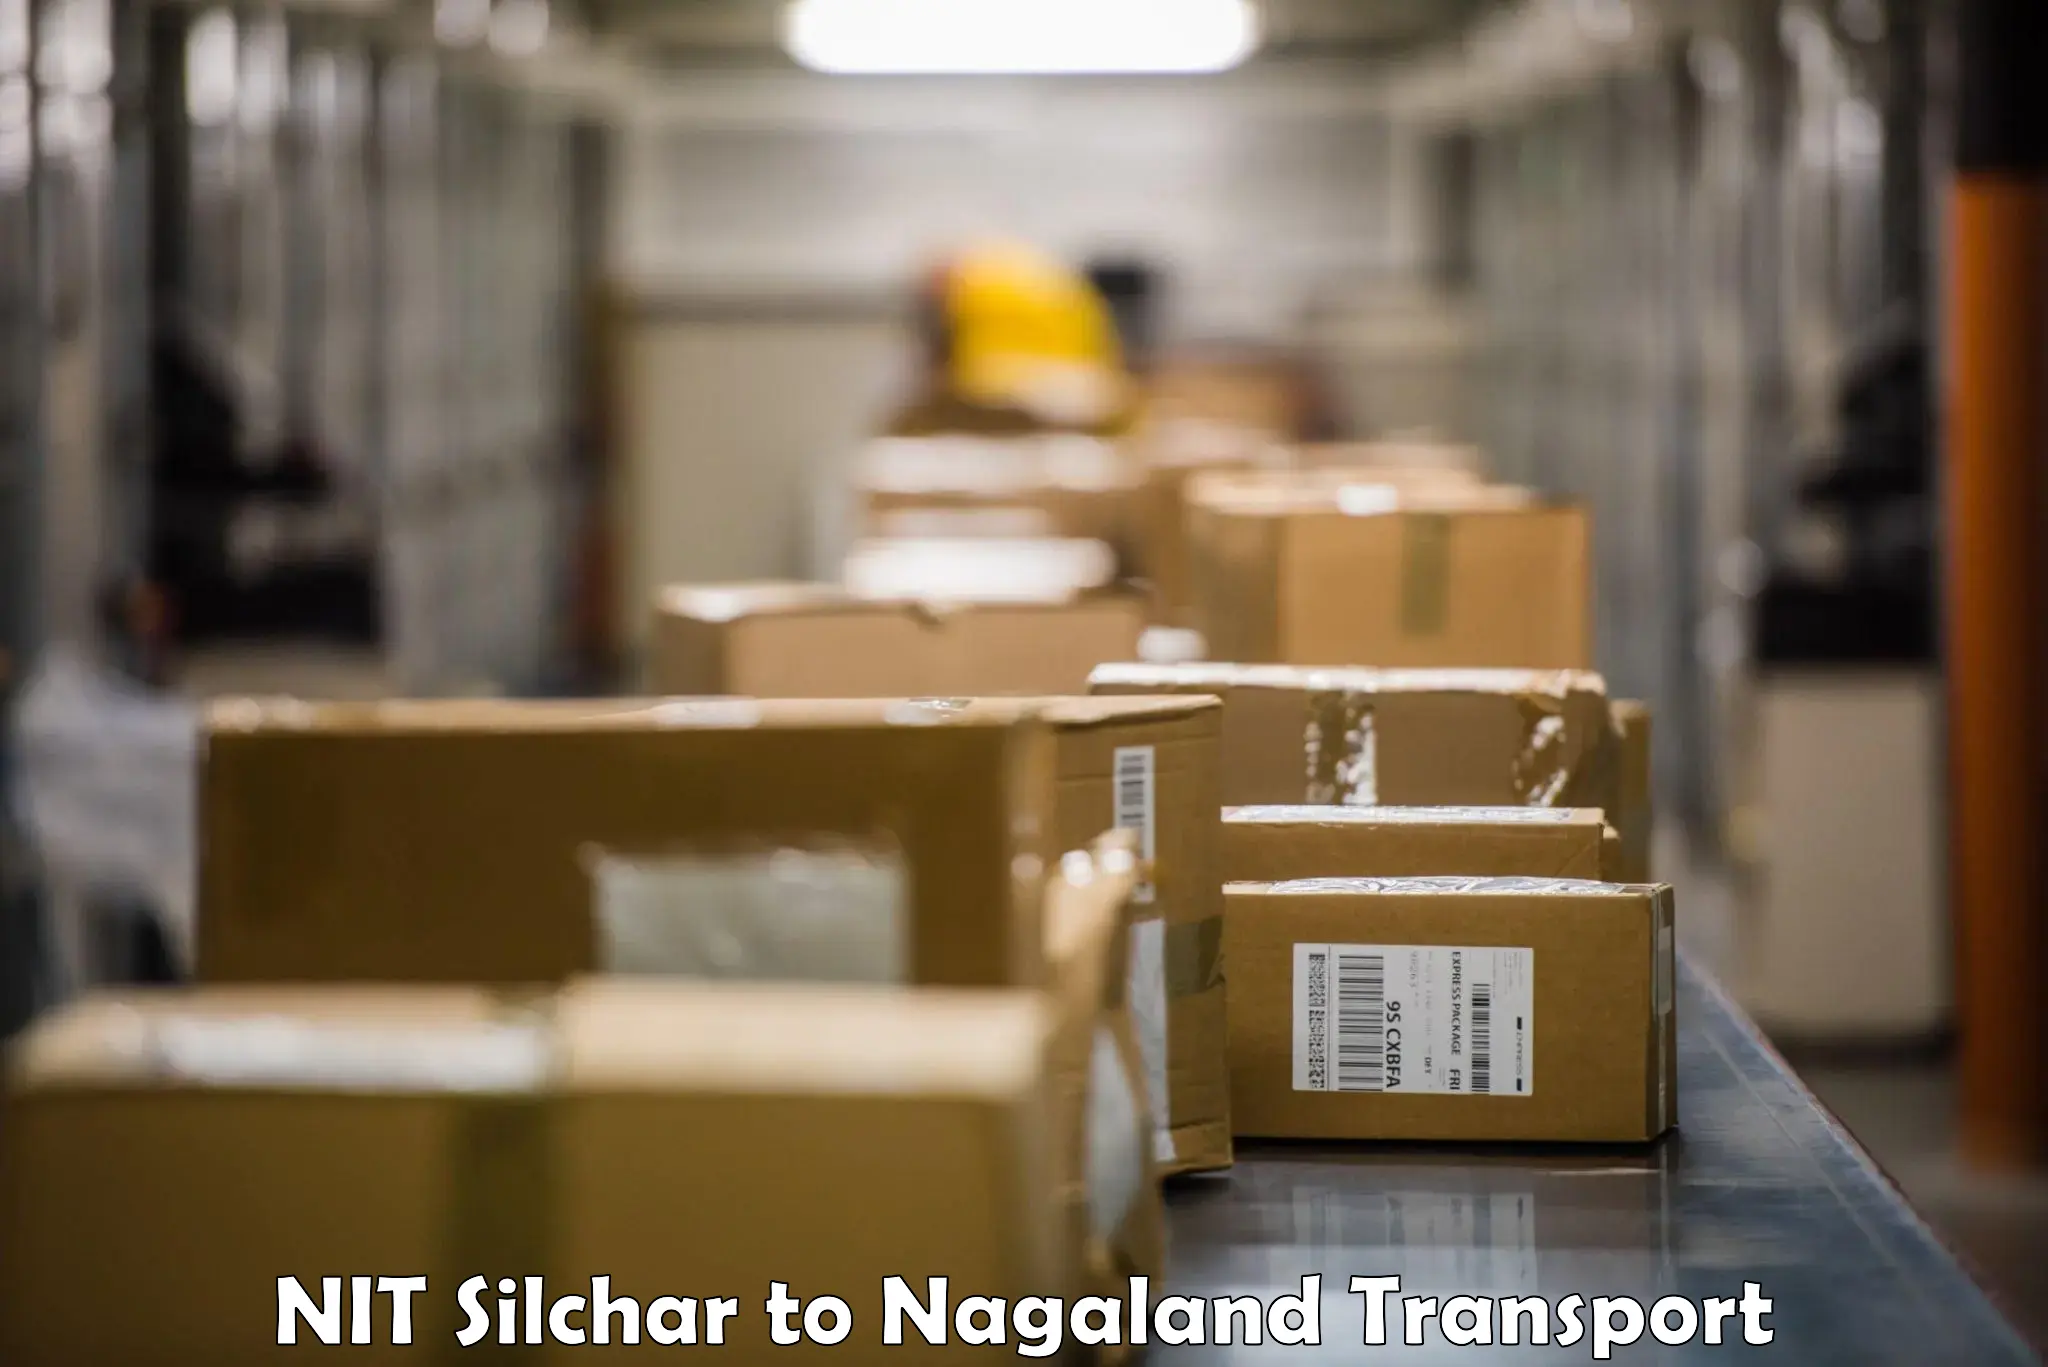 Daily transport service NIT Silchar to Mon